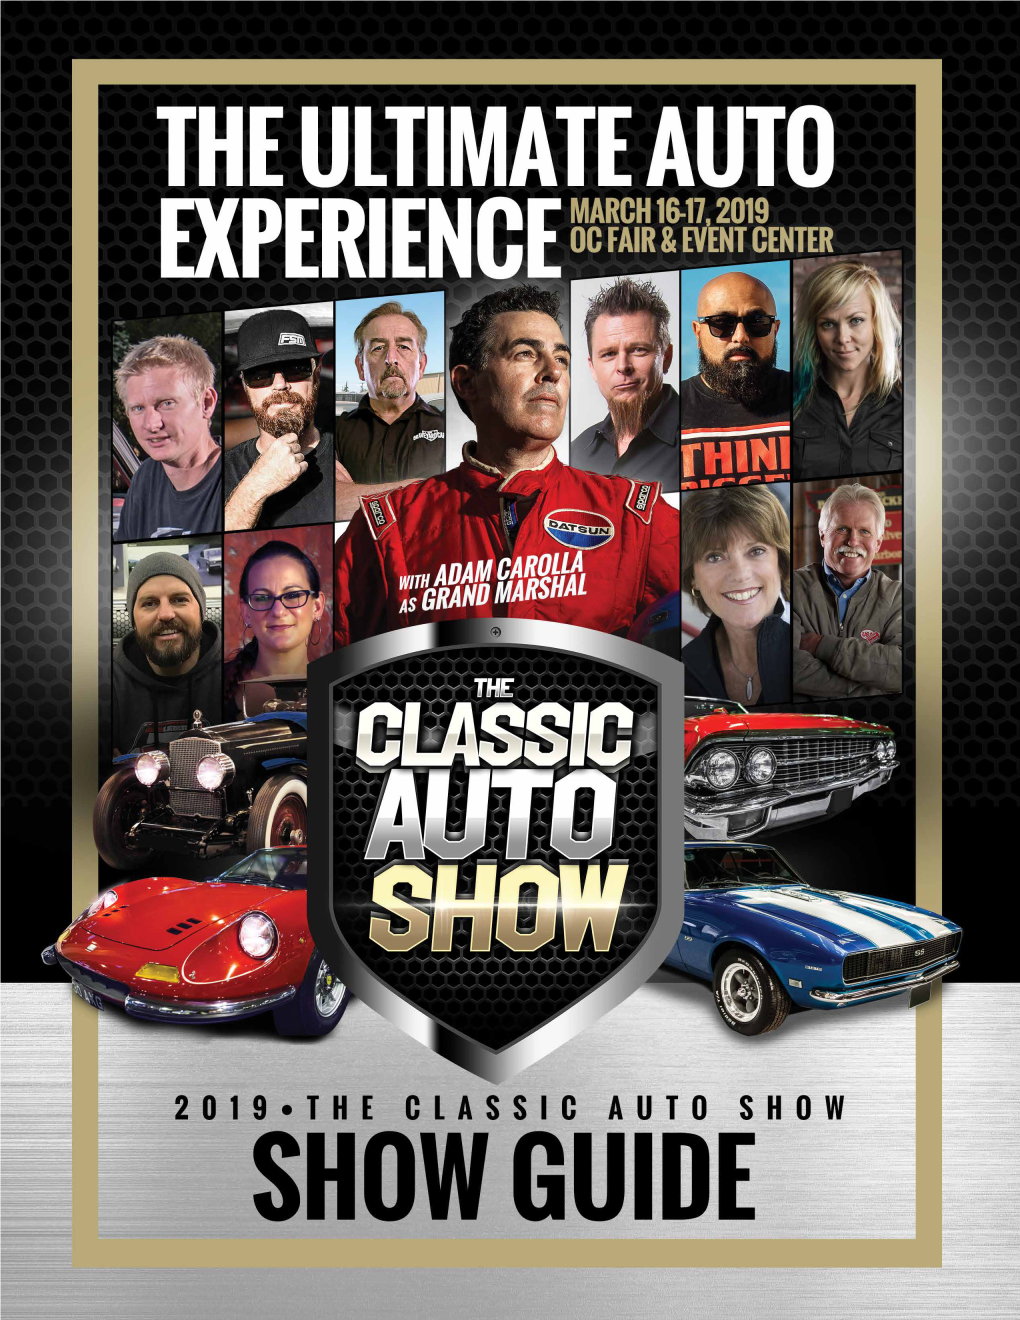 THE CLASSIC AUTO SHOW 2019 | 2 * Talent and Schedules Are SHOW FEATURES Subject to Change